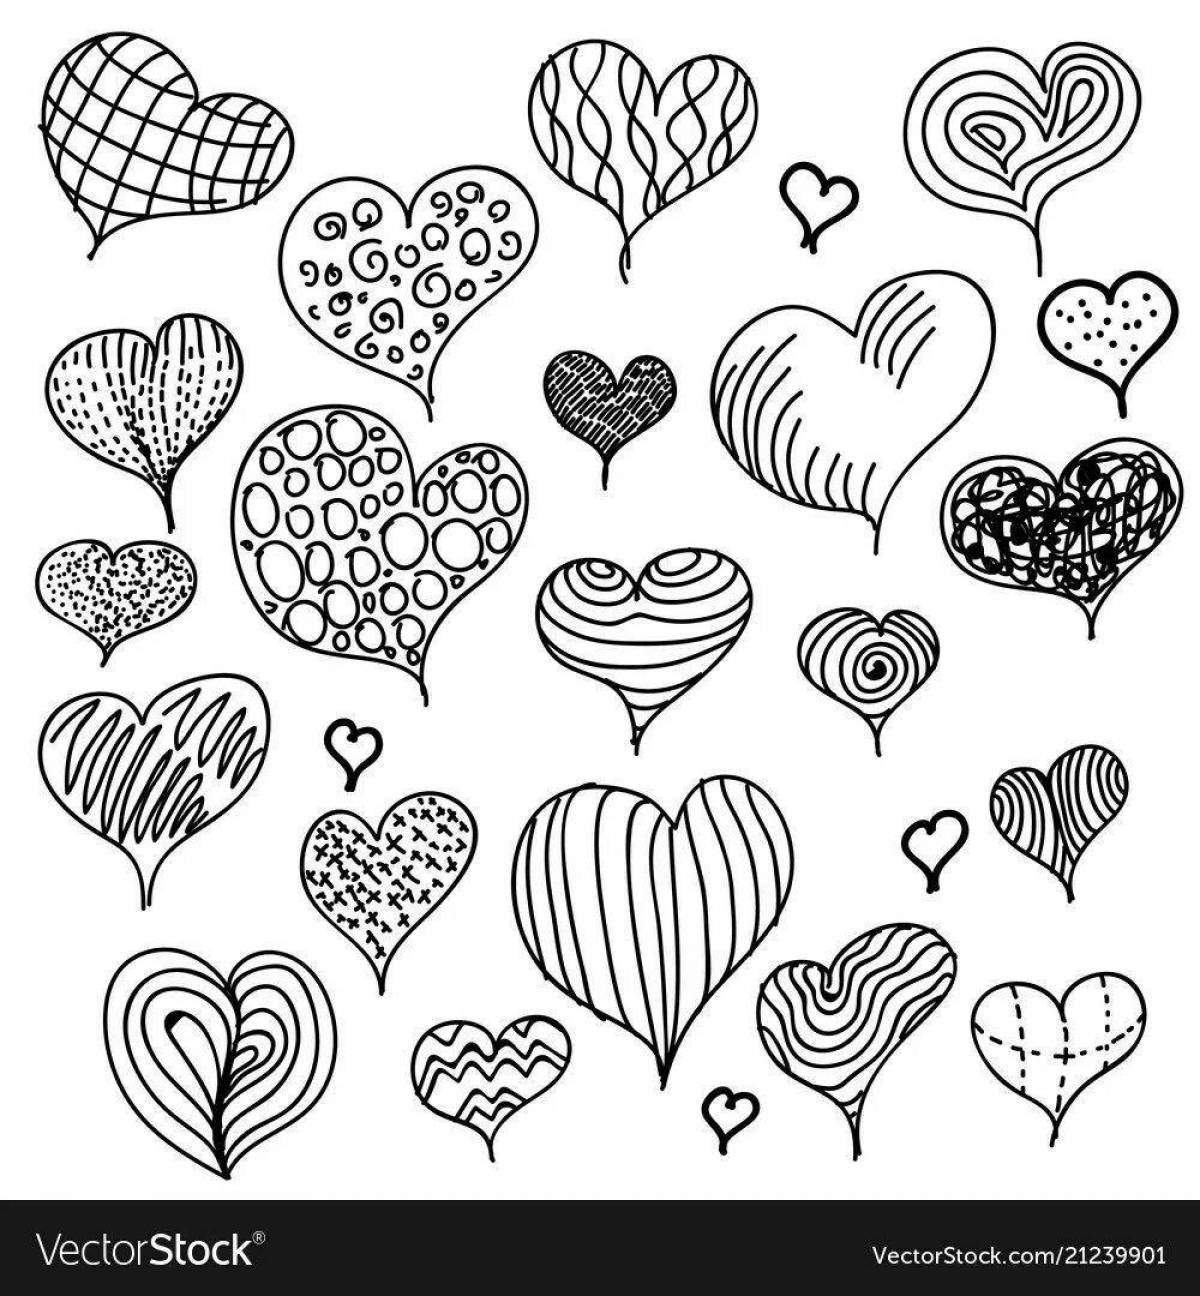 Great rainbow heart coloring page